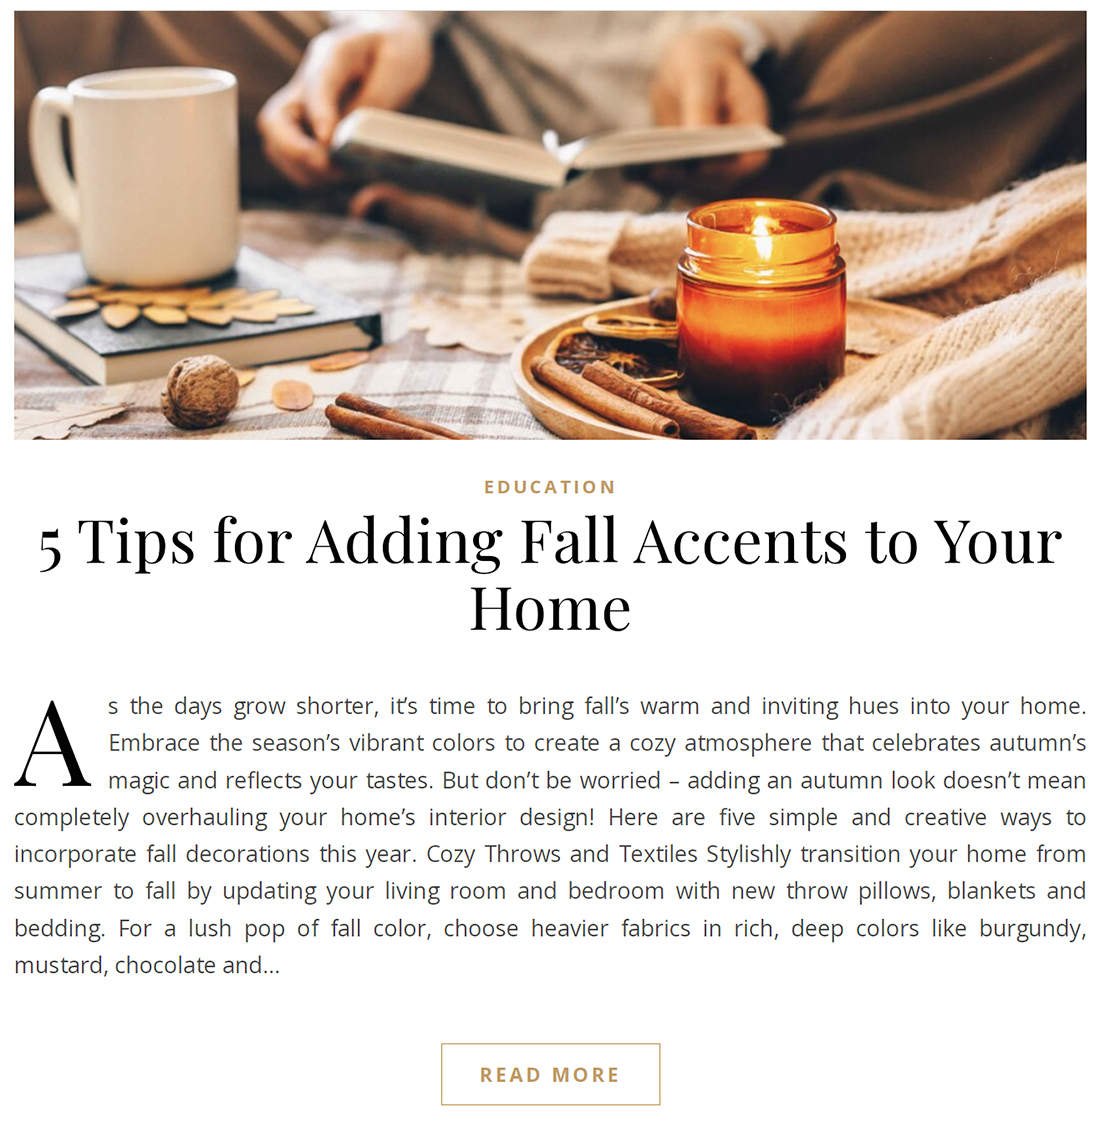 Fall Accents